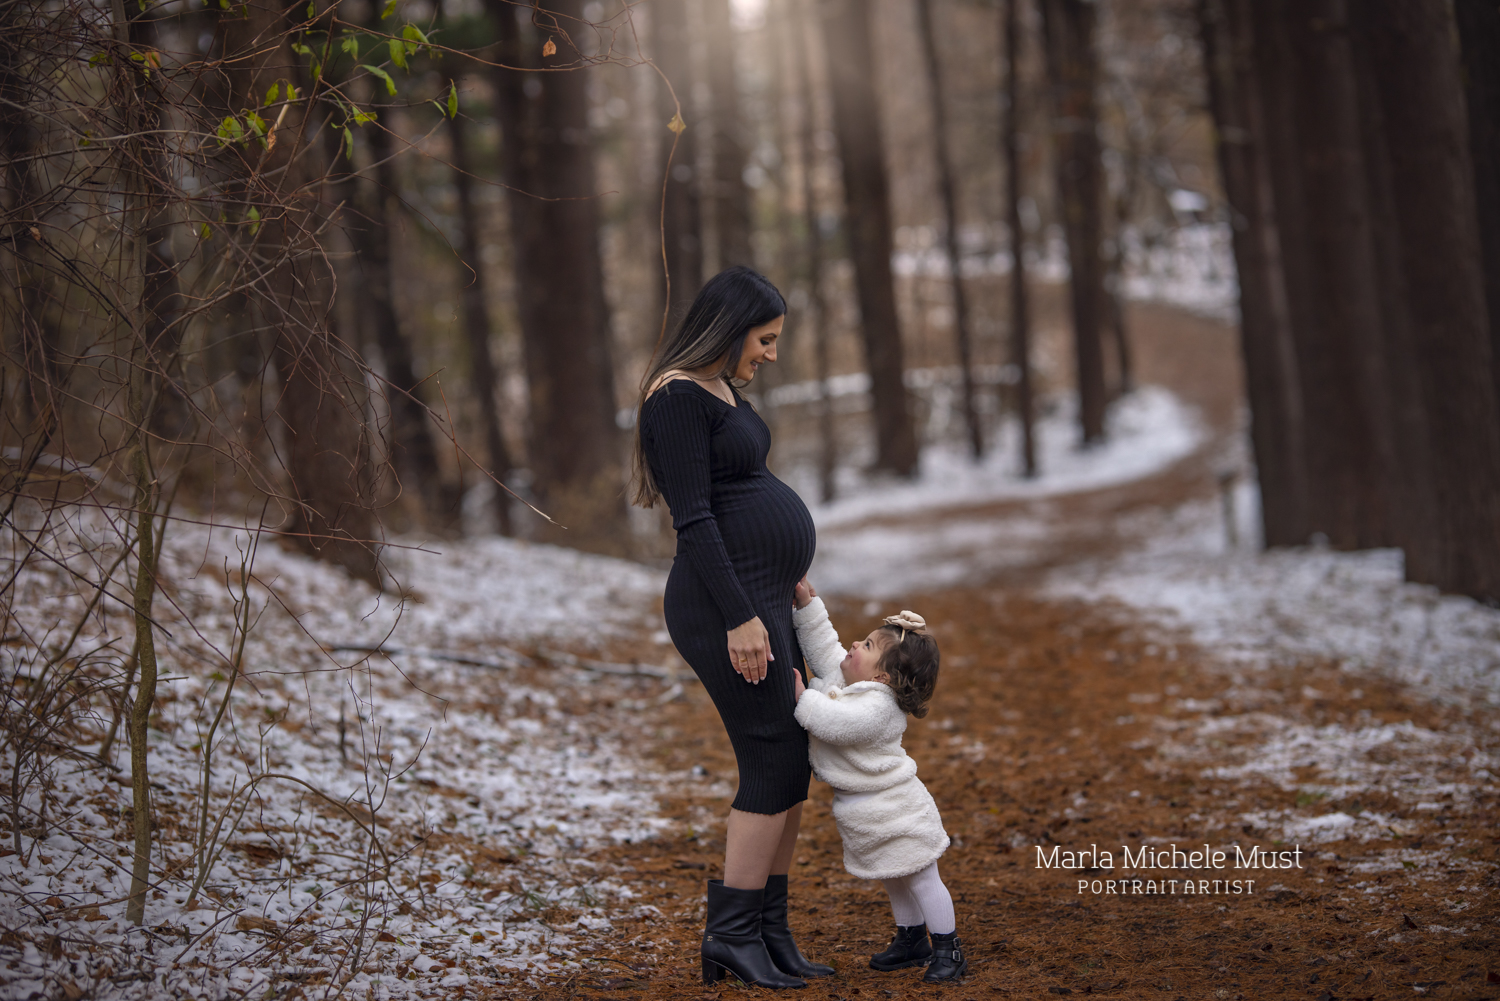 An expecting mother smiles at her young daughter as she reaches towards her pregnant belly in a snowy Detroit forest.